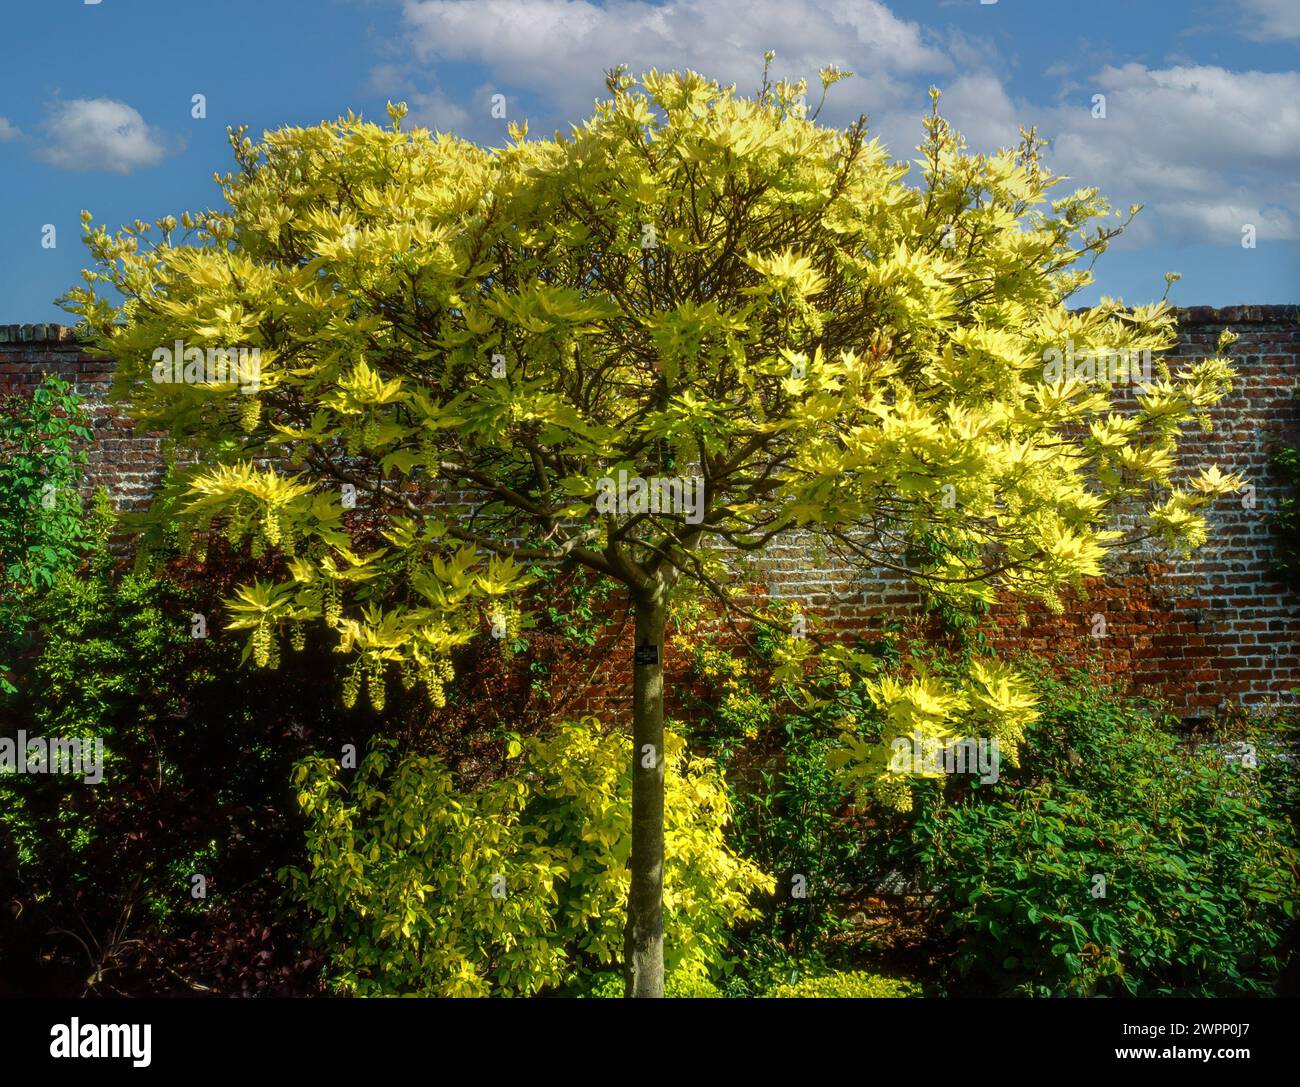 Brilliant specimen tree Acer pseudoplatanus 'Prince Handjery' with bright yellow leaves & blossom growing in English walled garden border, England, UK Stock Photo